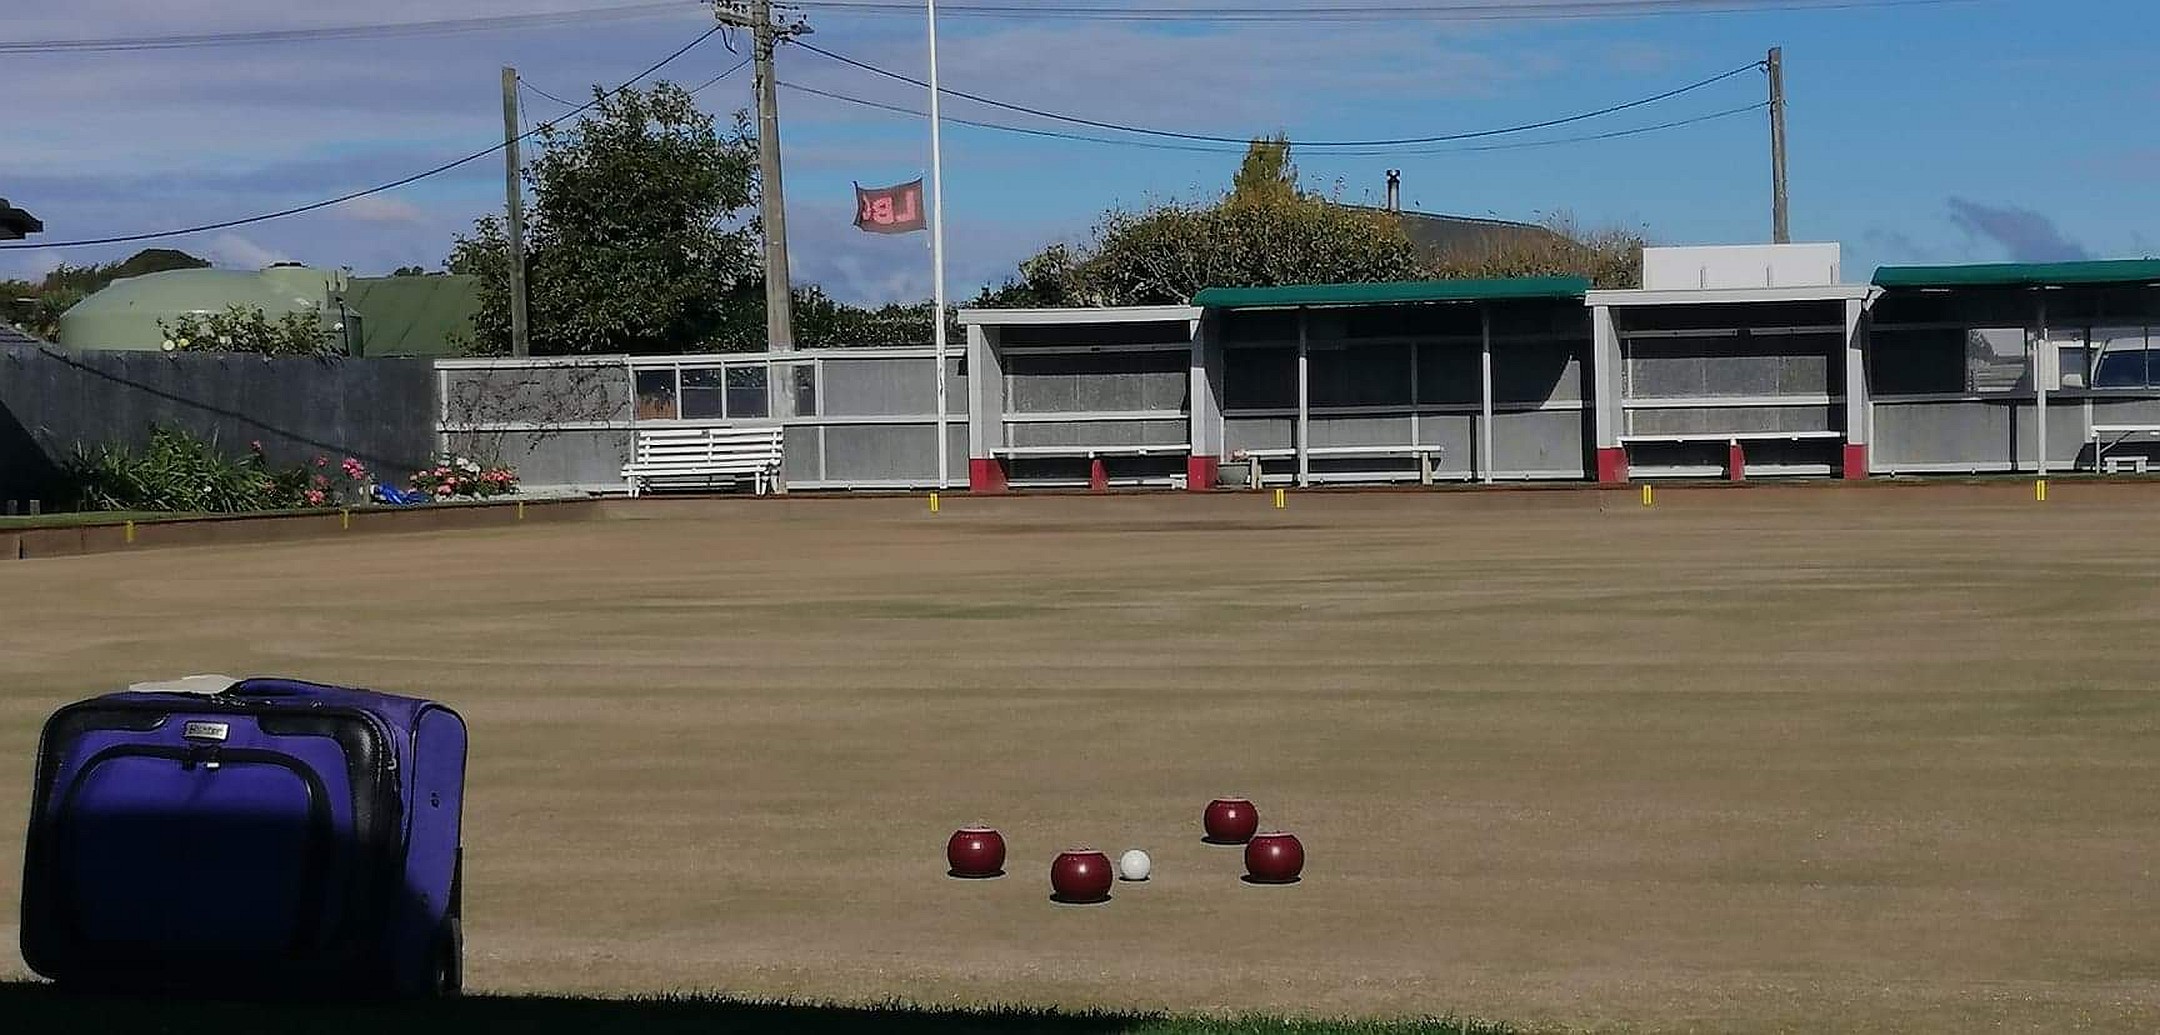 The Presidents Tournament, Don's Bowls laid out in memory - 17 April 2021